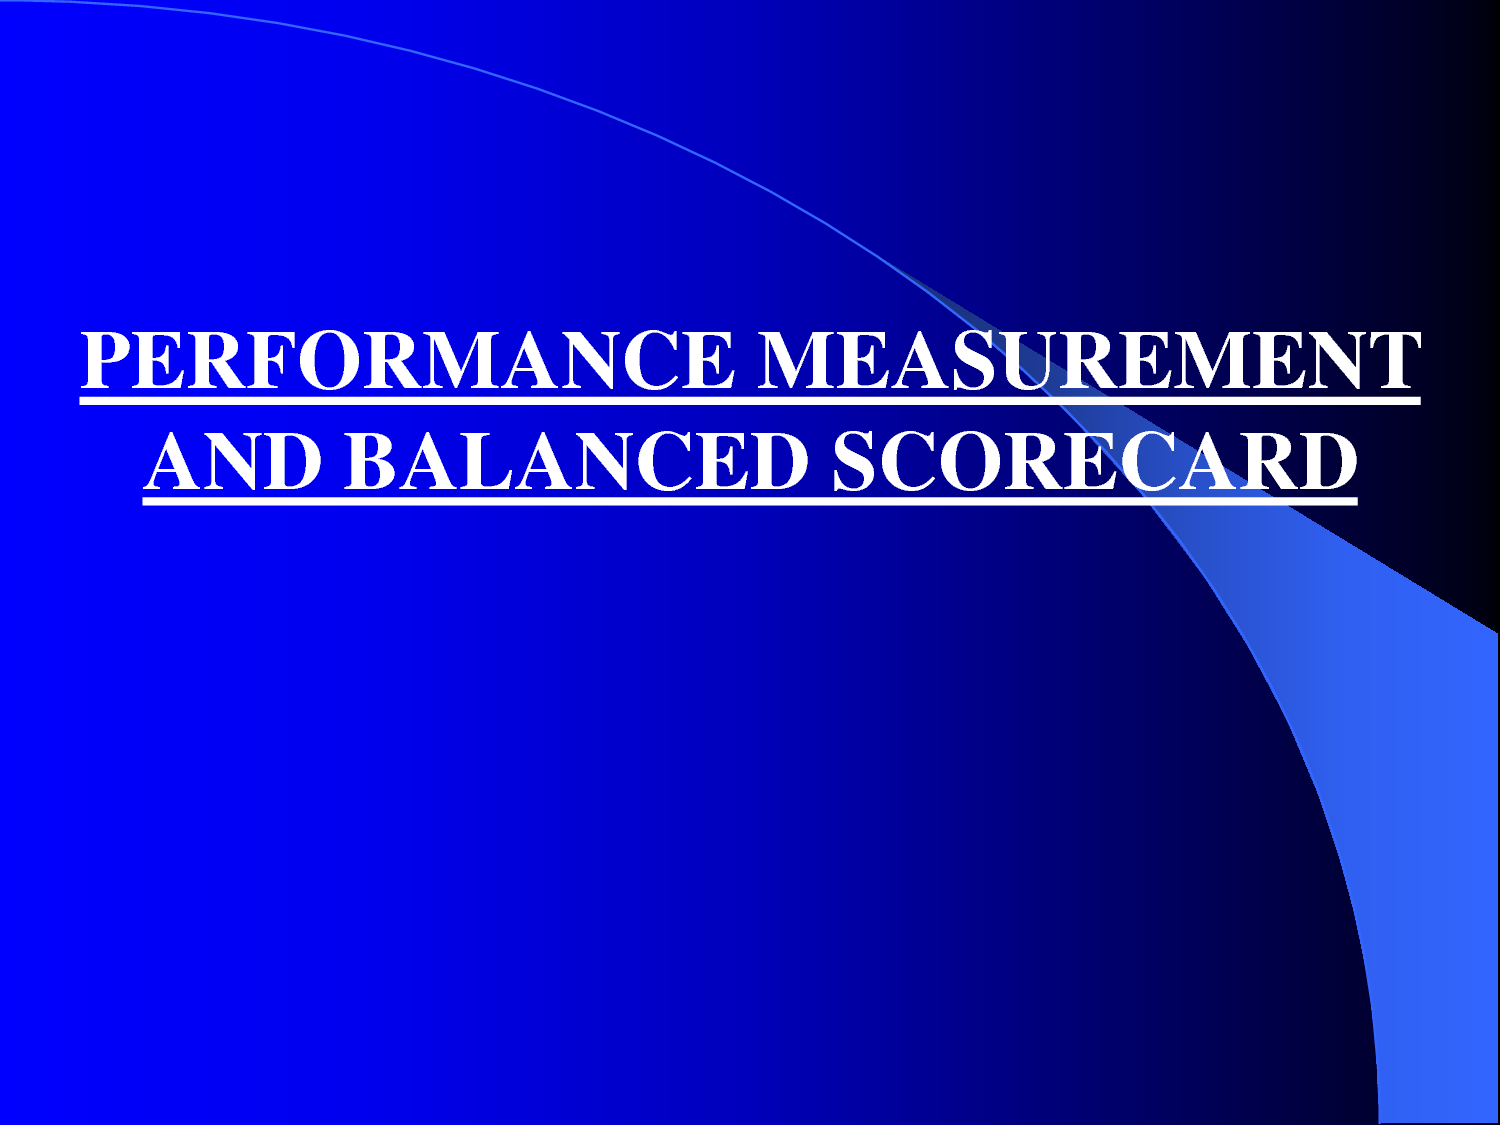 productivity financial performance measures examples 7 Productivity